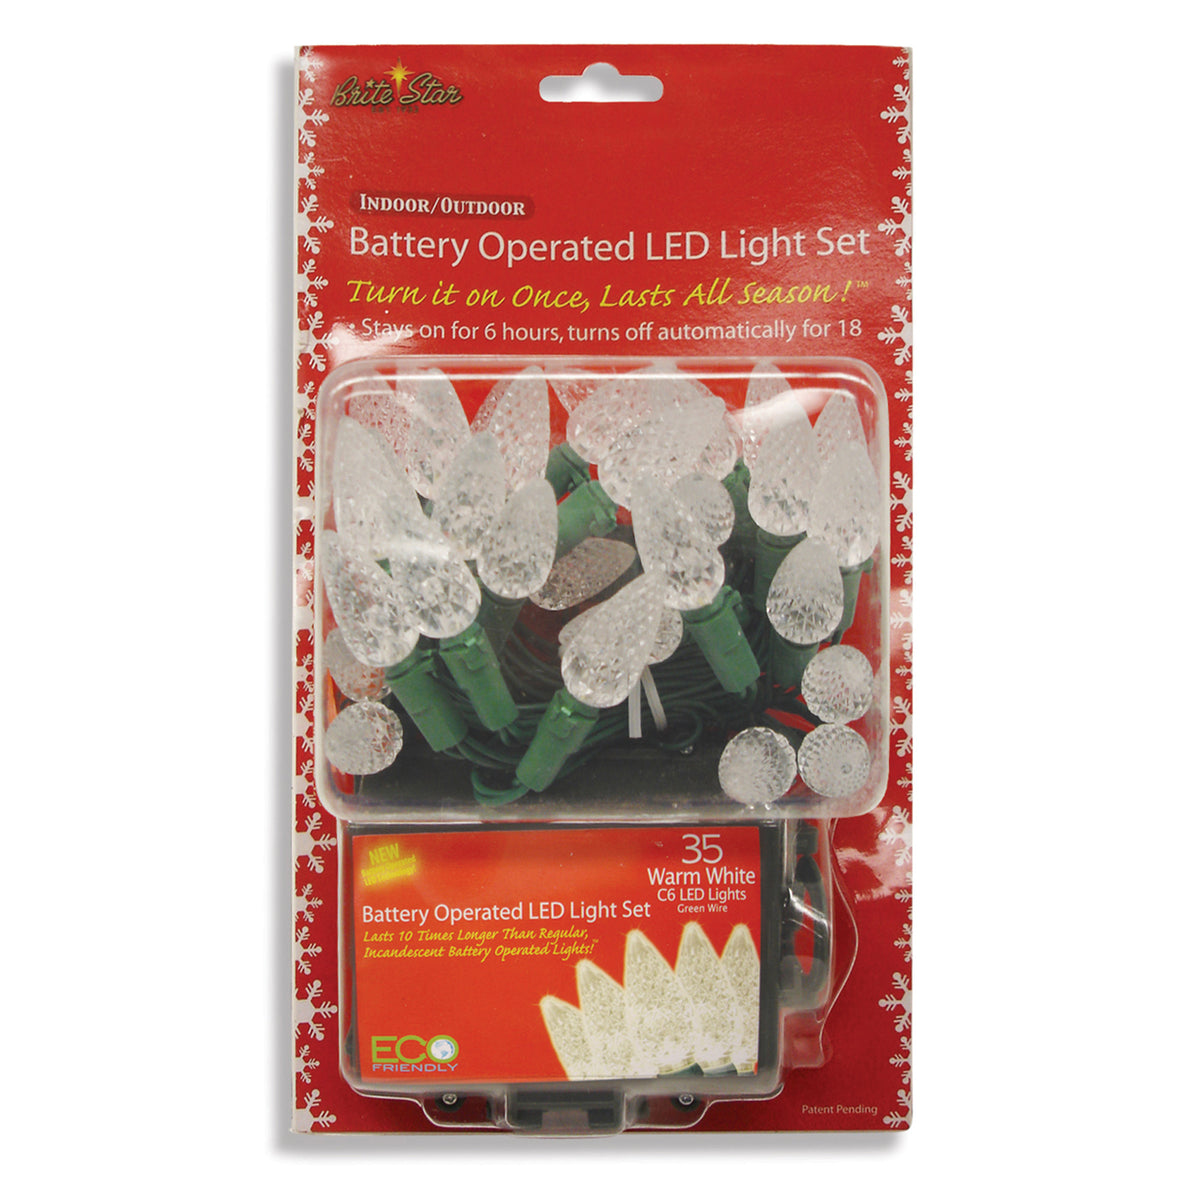 Brite Star 41-622-23 C6 Battery Operated LED Lights Set, 35 Warm, White